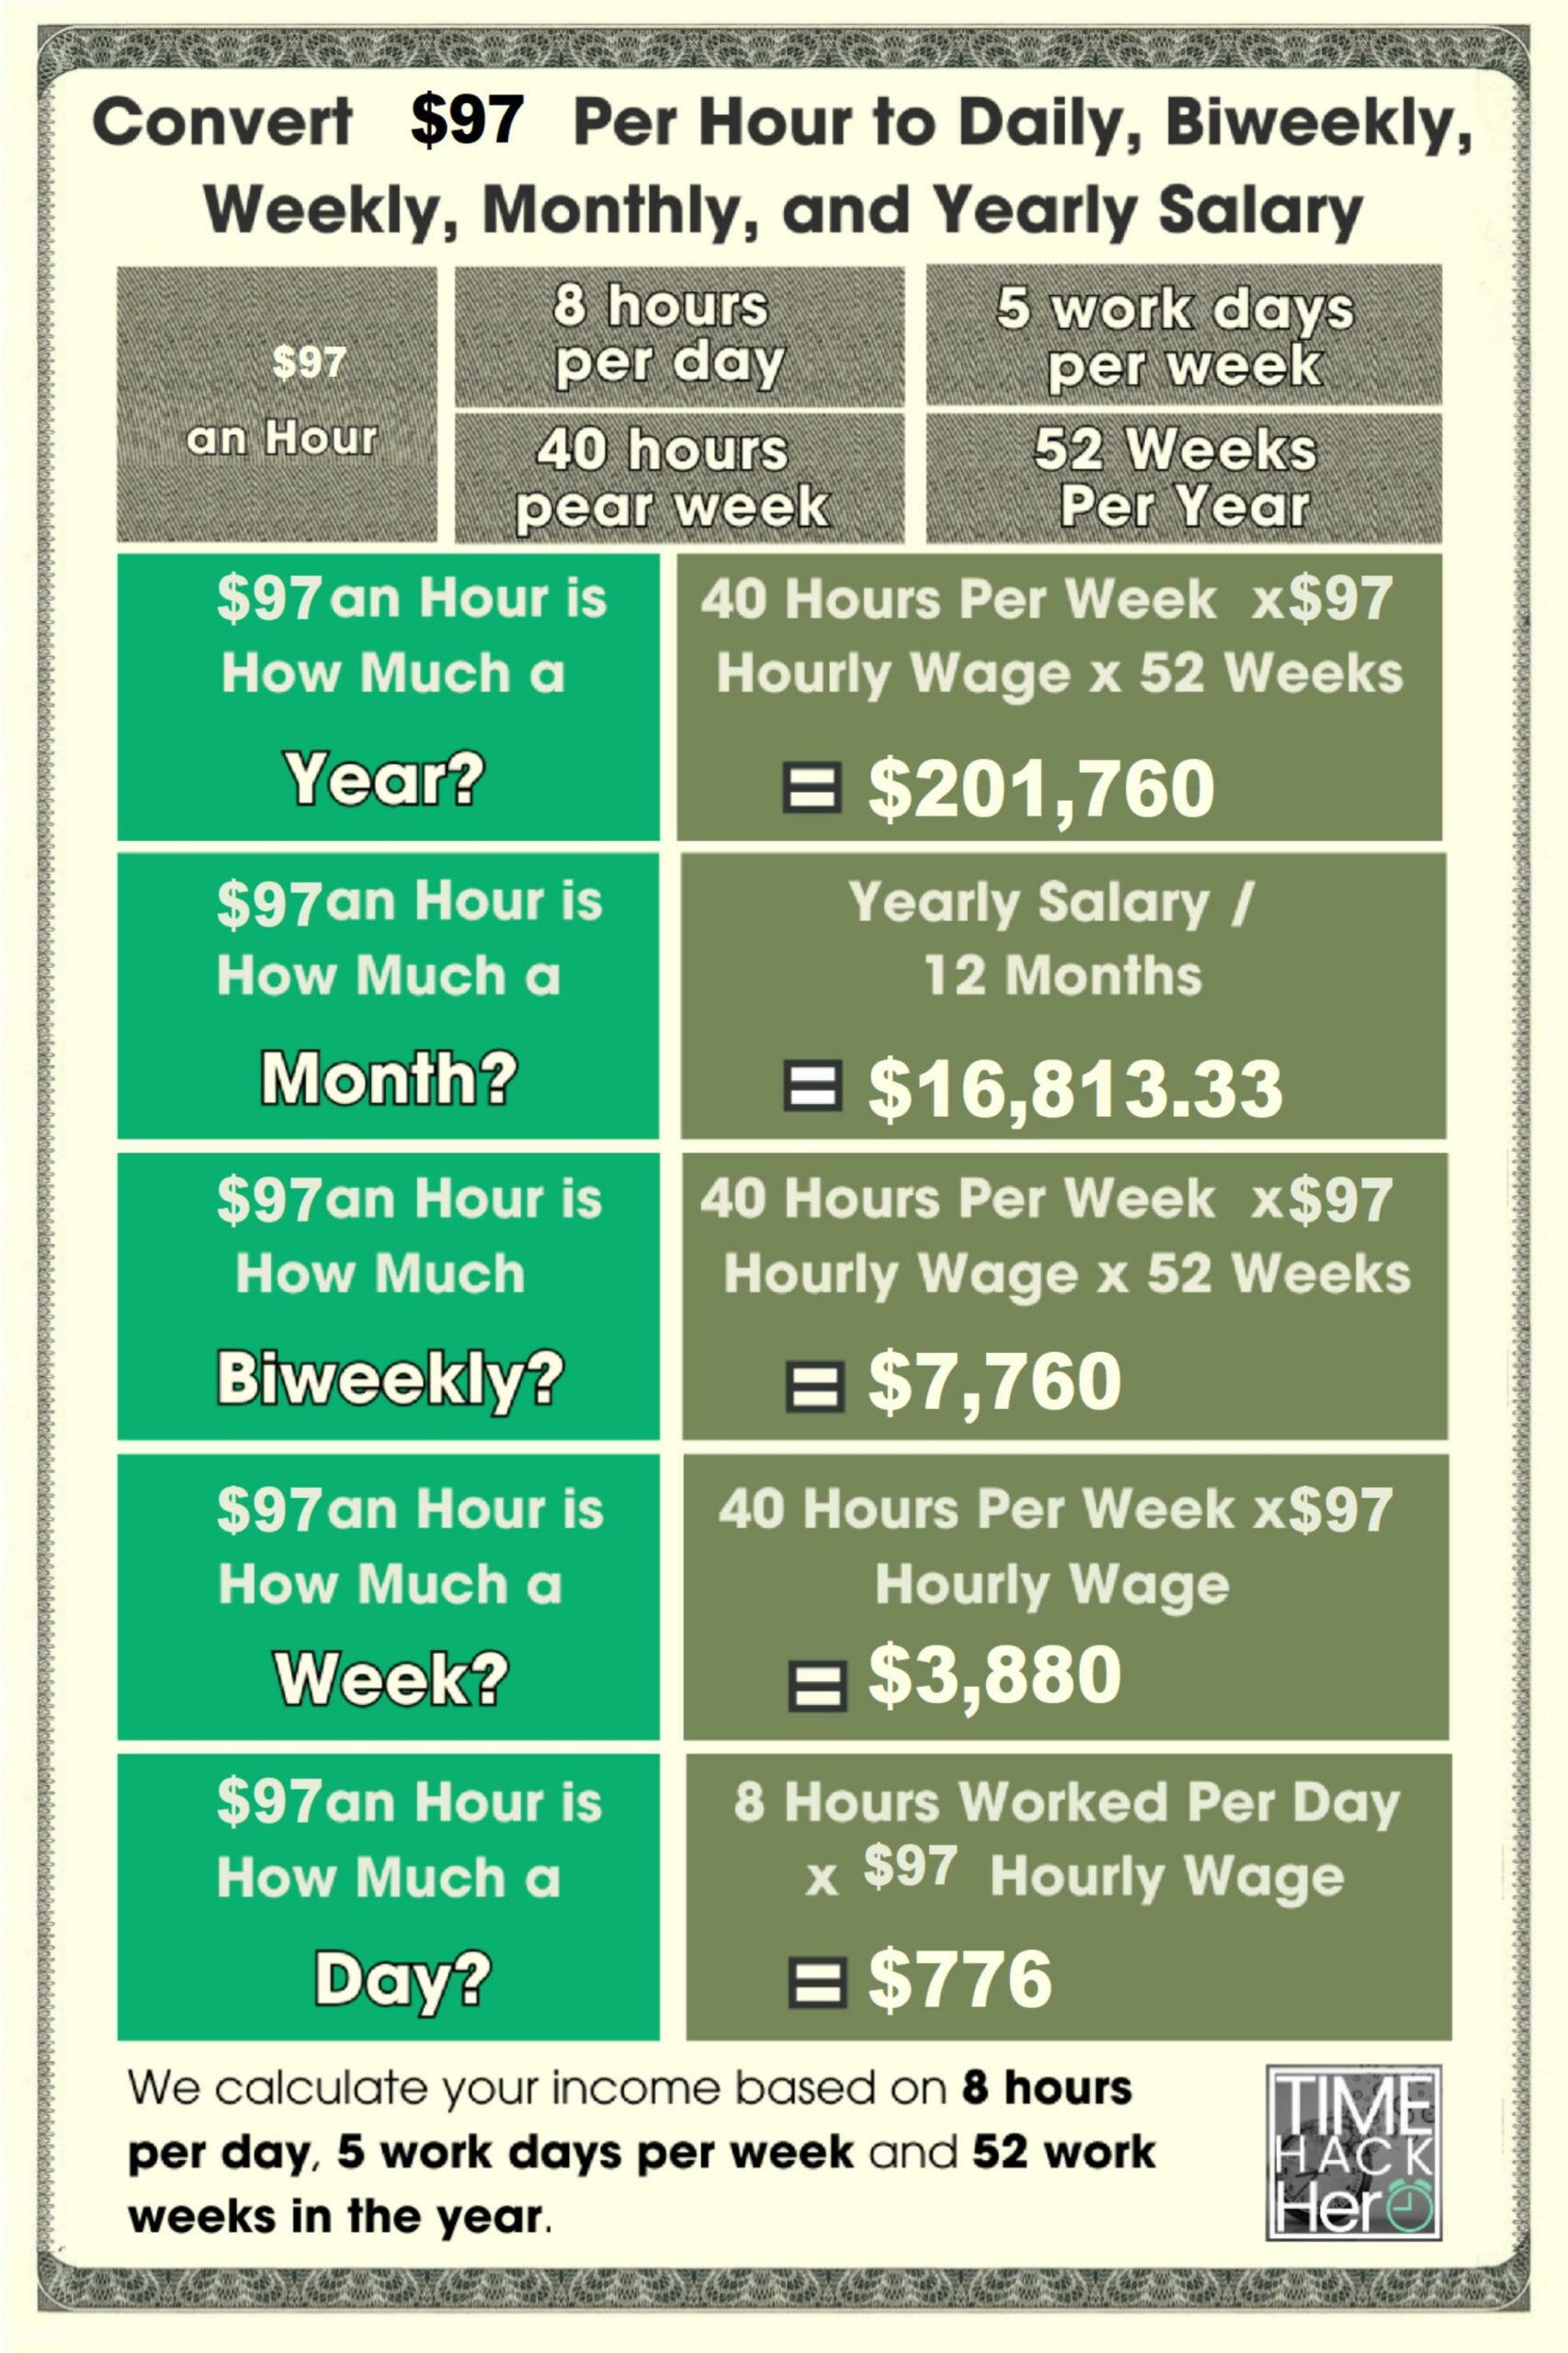 Convert $97 Per Hour to Weekly, Monthly, and Yearly Salary